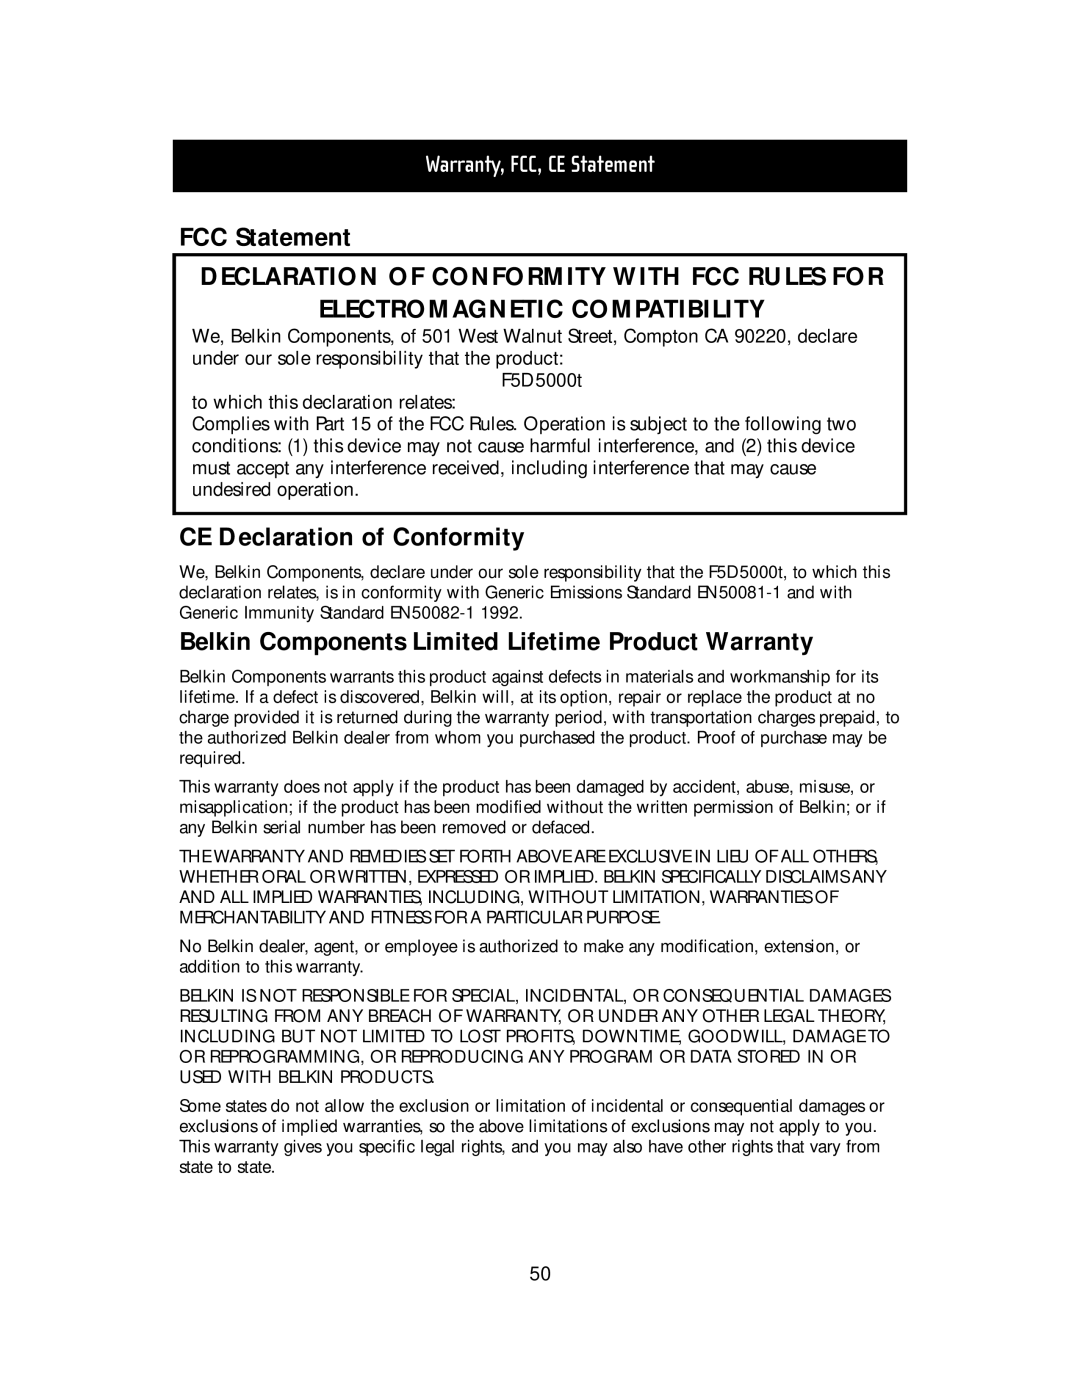 Belkin F5D5000t manual FCC Statement DECLARATION OF CONFORMITY WITH FCC RULES FOR, Electromagnetic Compatibility 